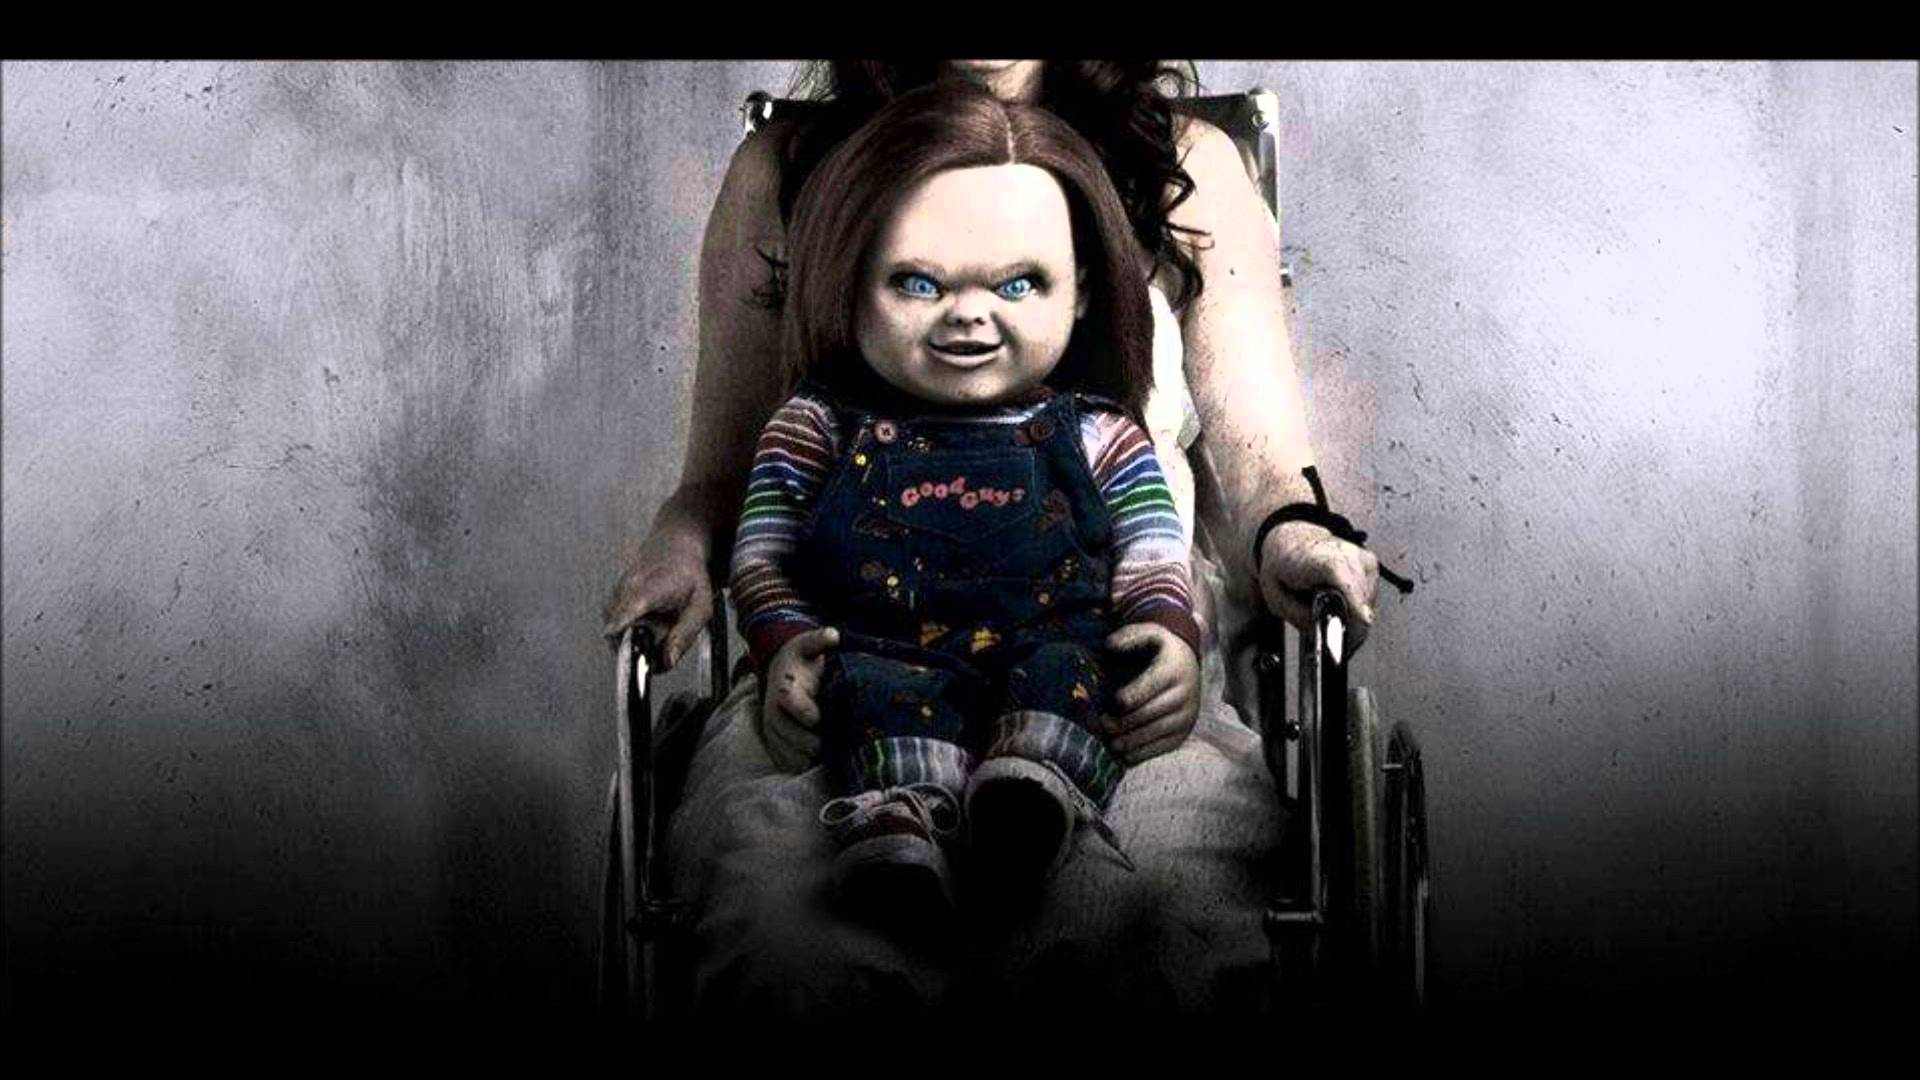 image For > Curse Of Chucky Wallpaper HD